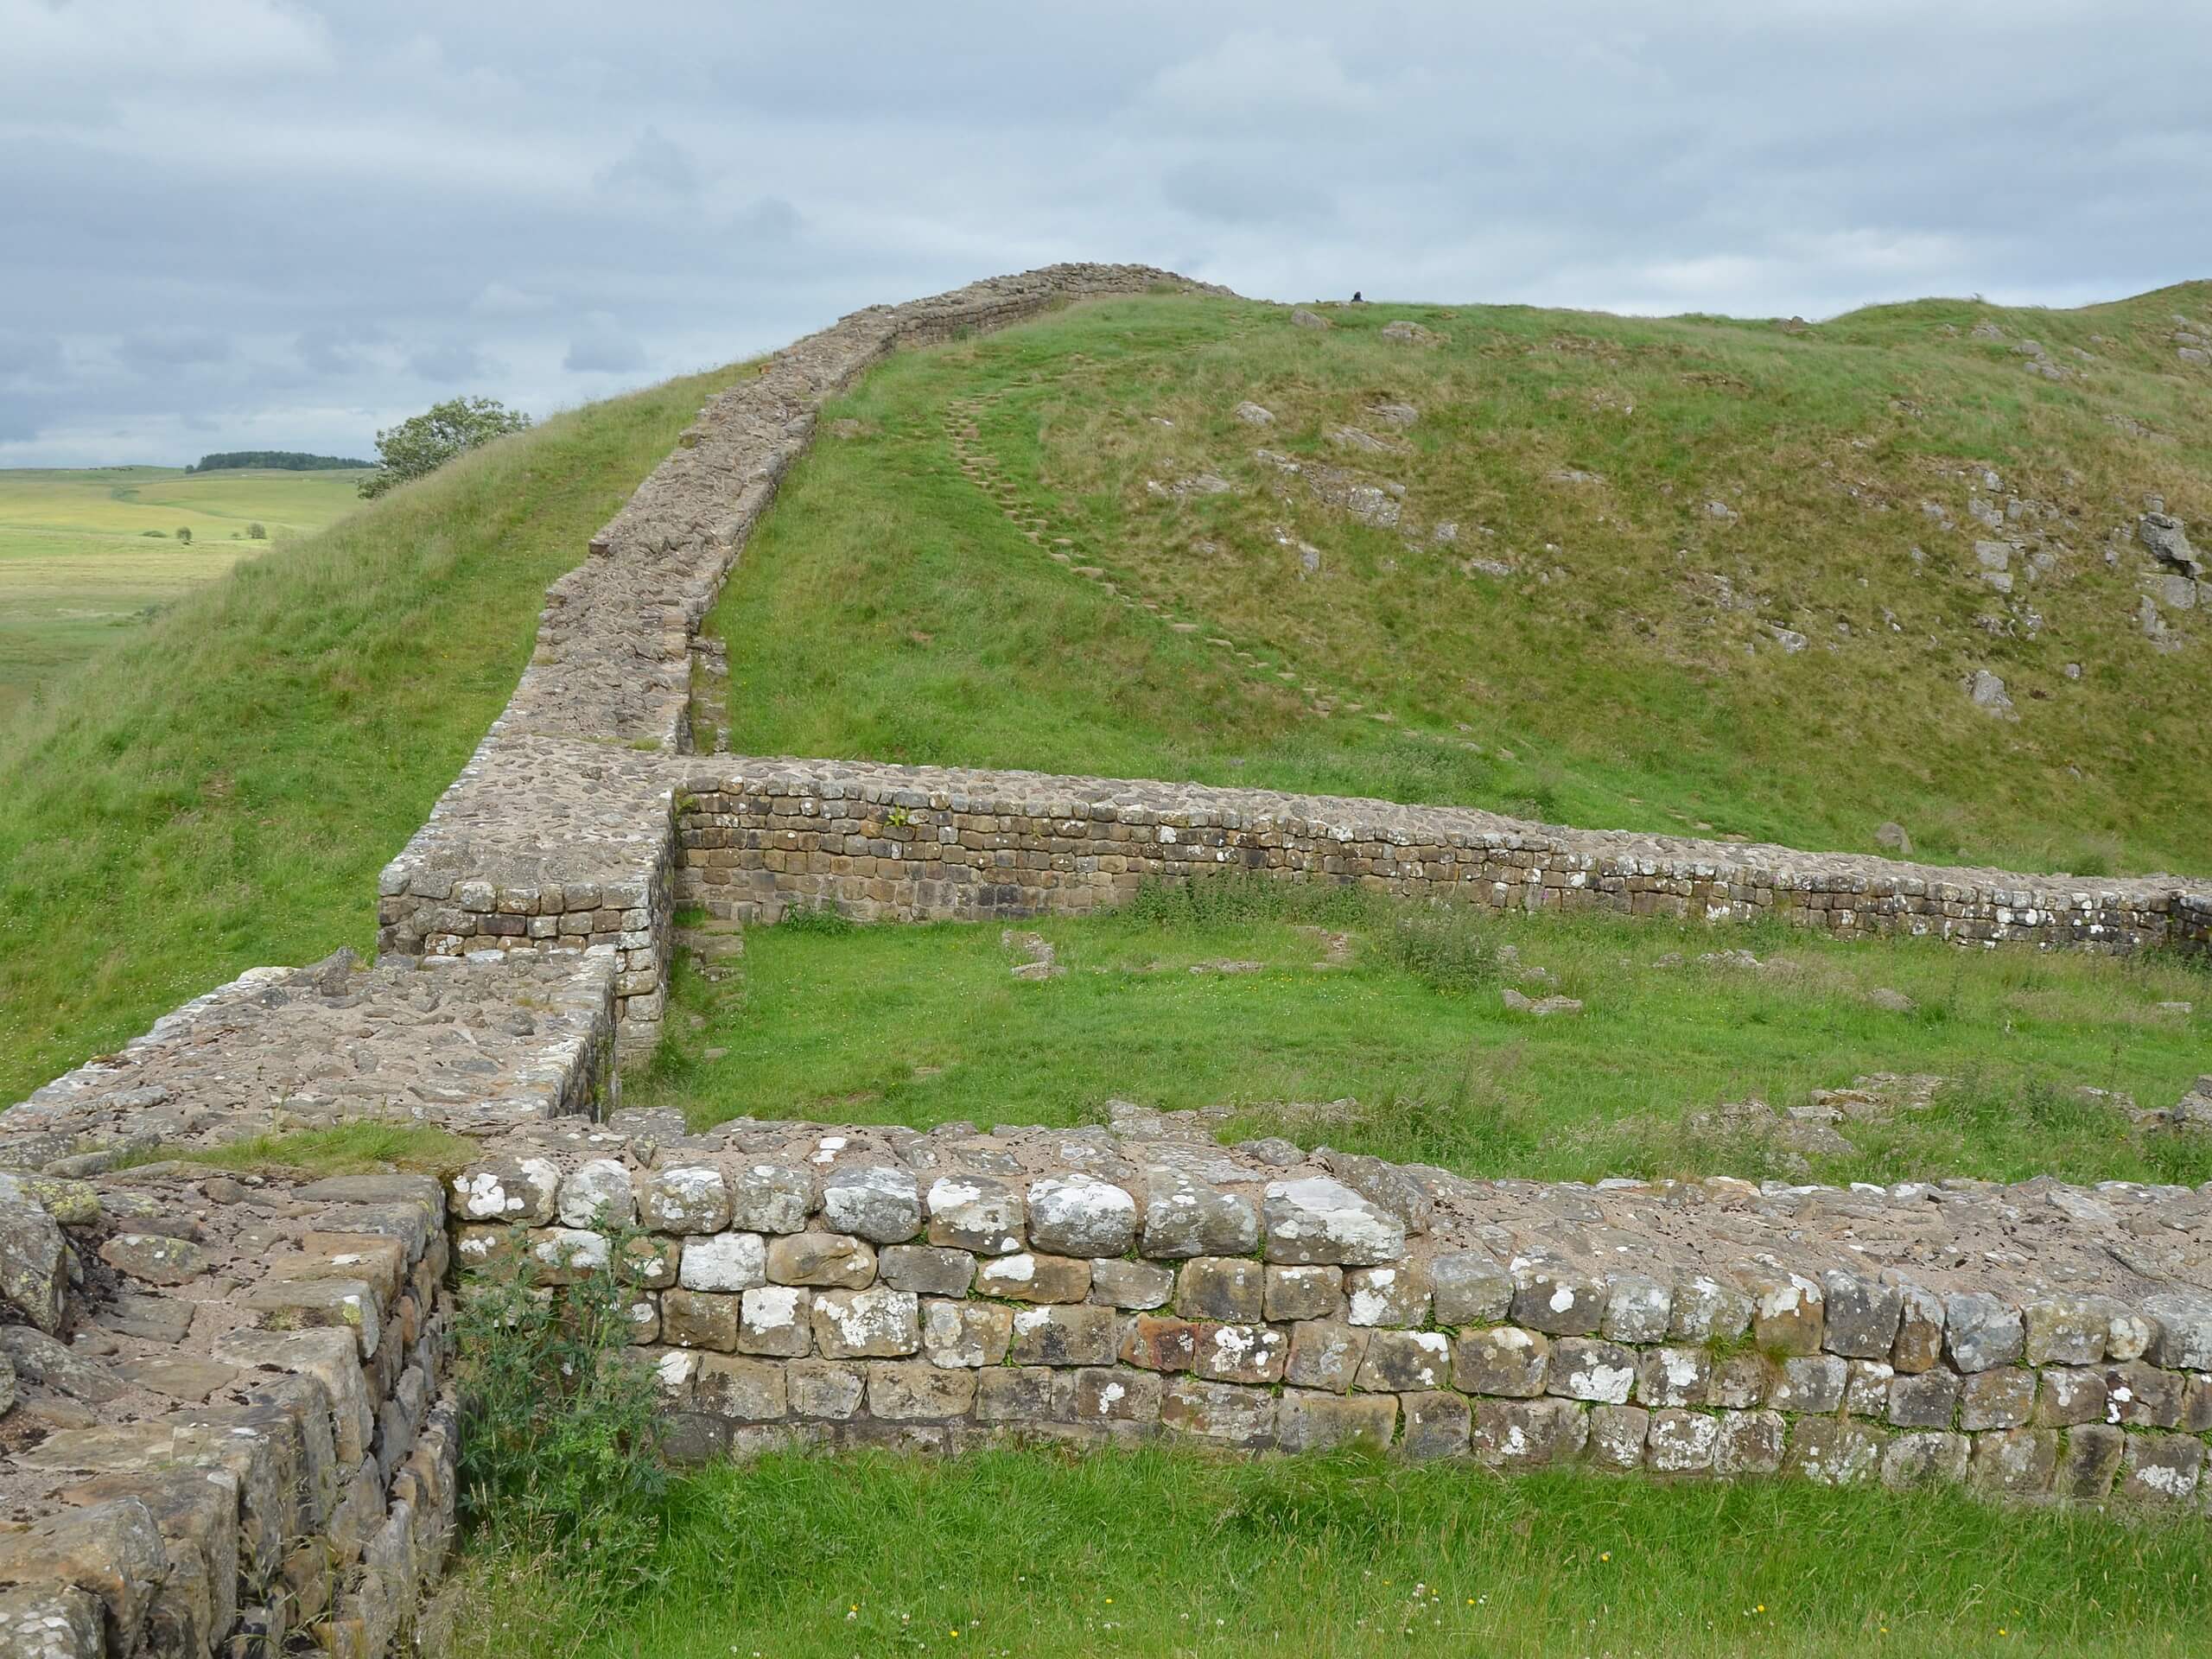 Hadrian’s Wall: Chollerford to Steel Rigg